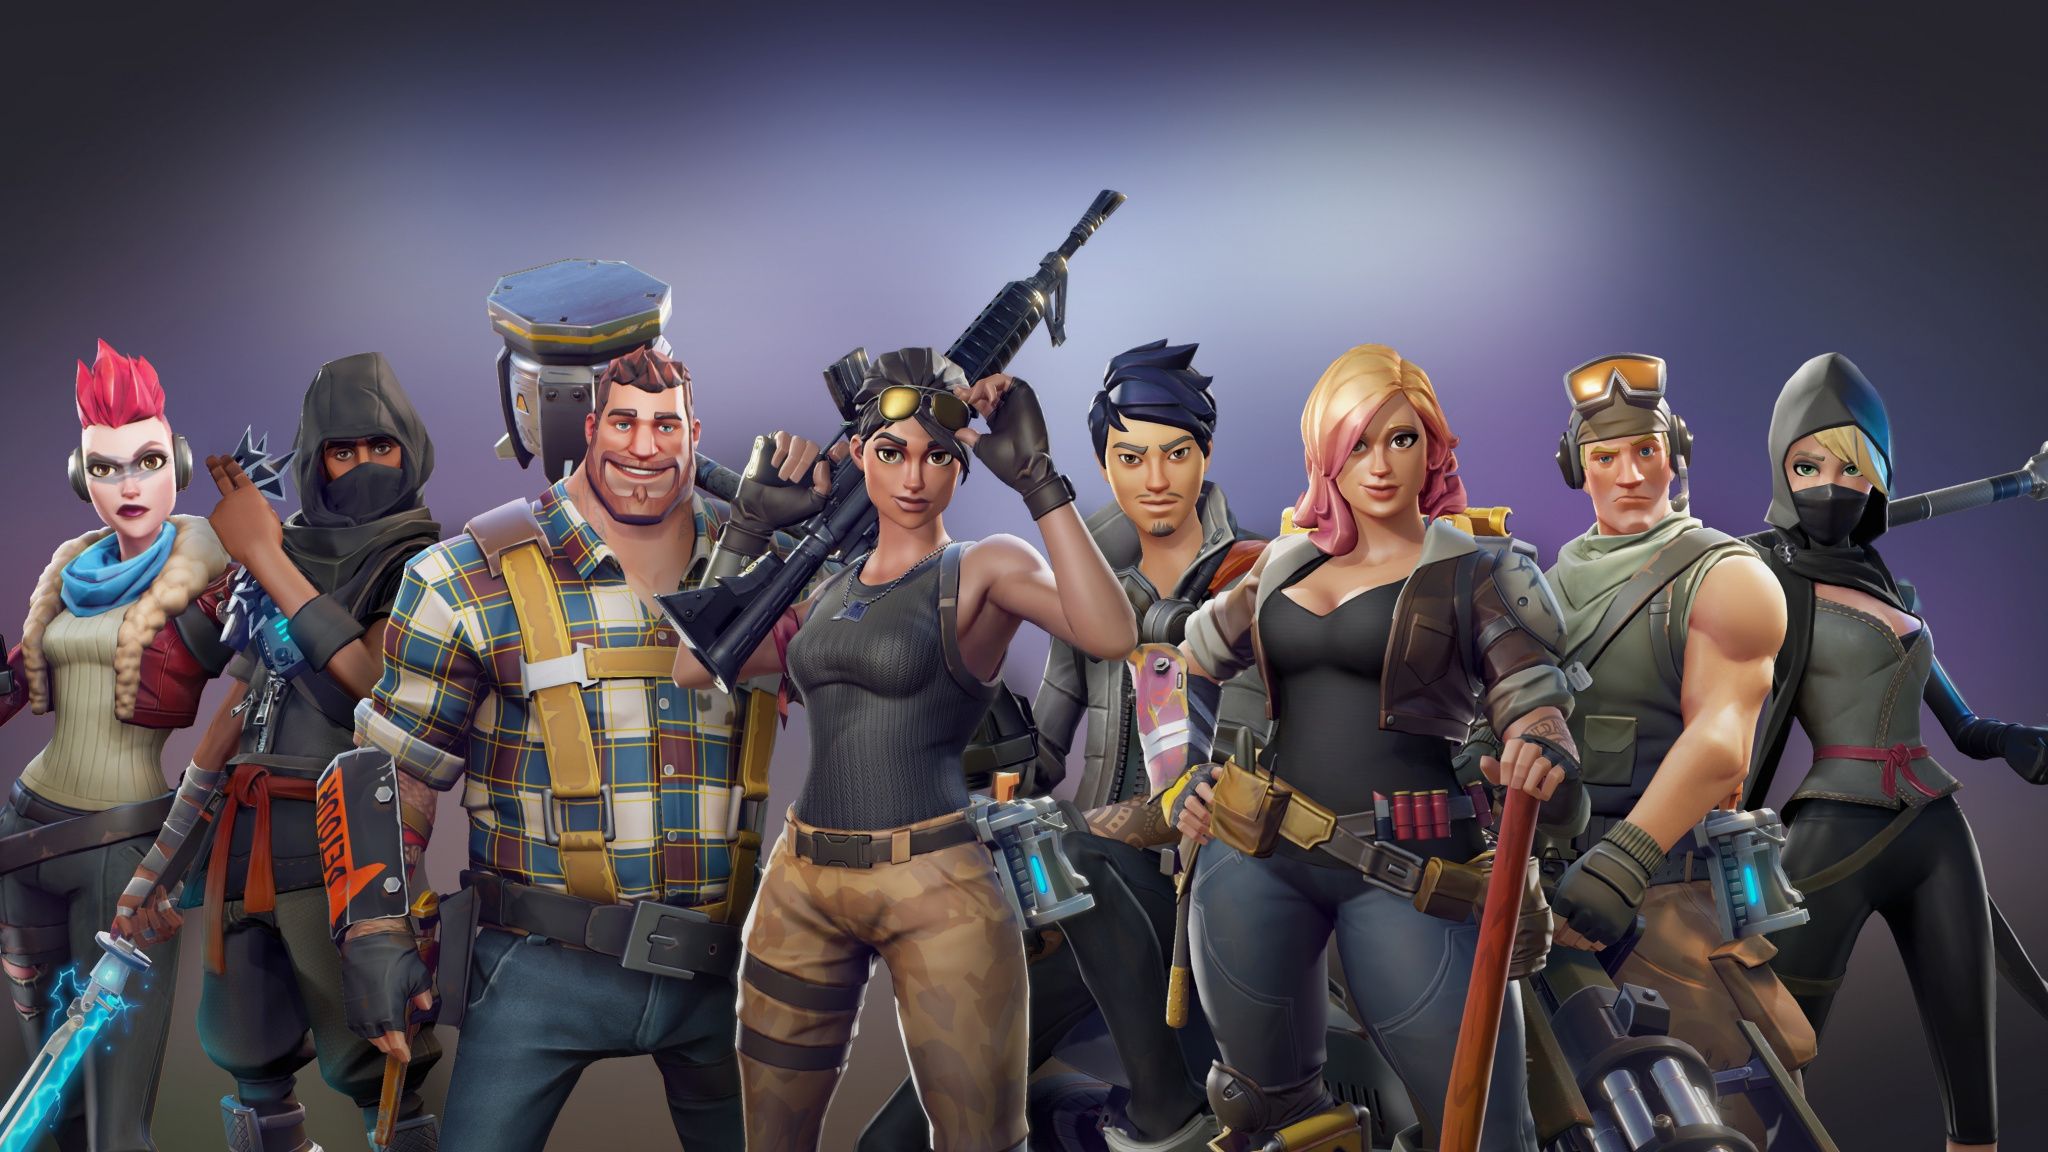 Download 2048x1152 wallpapers all characters, video game, fortnite